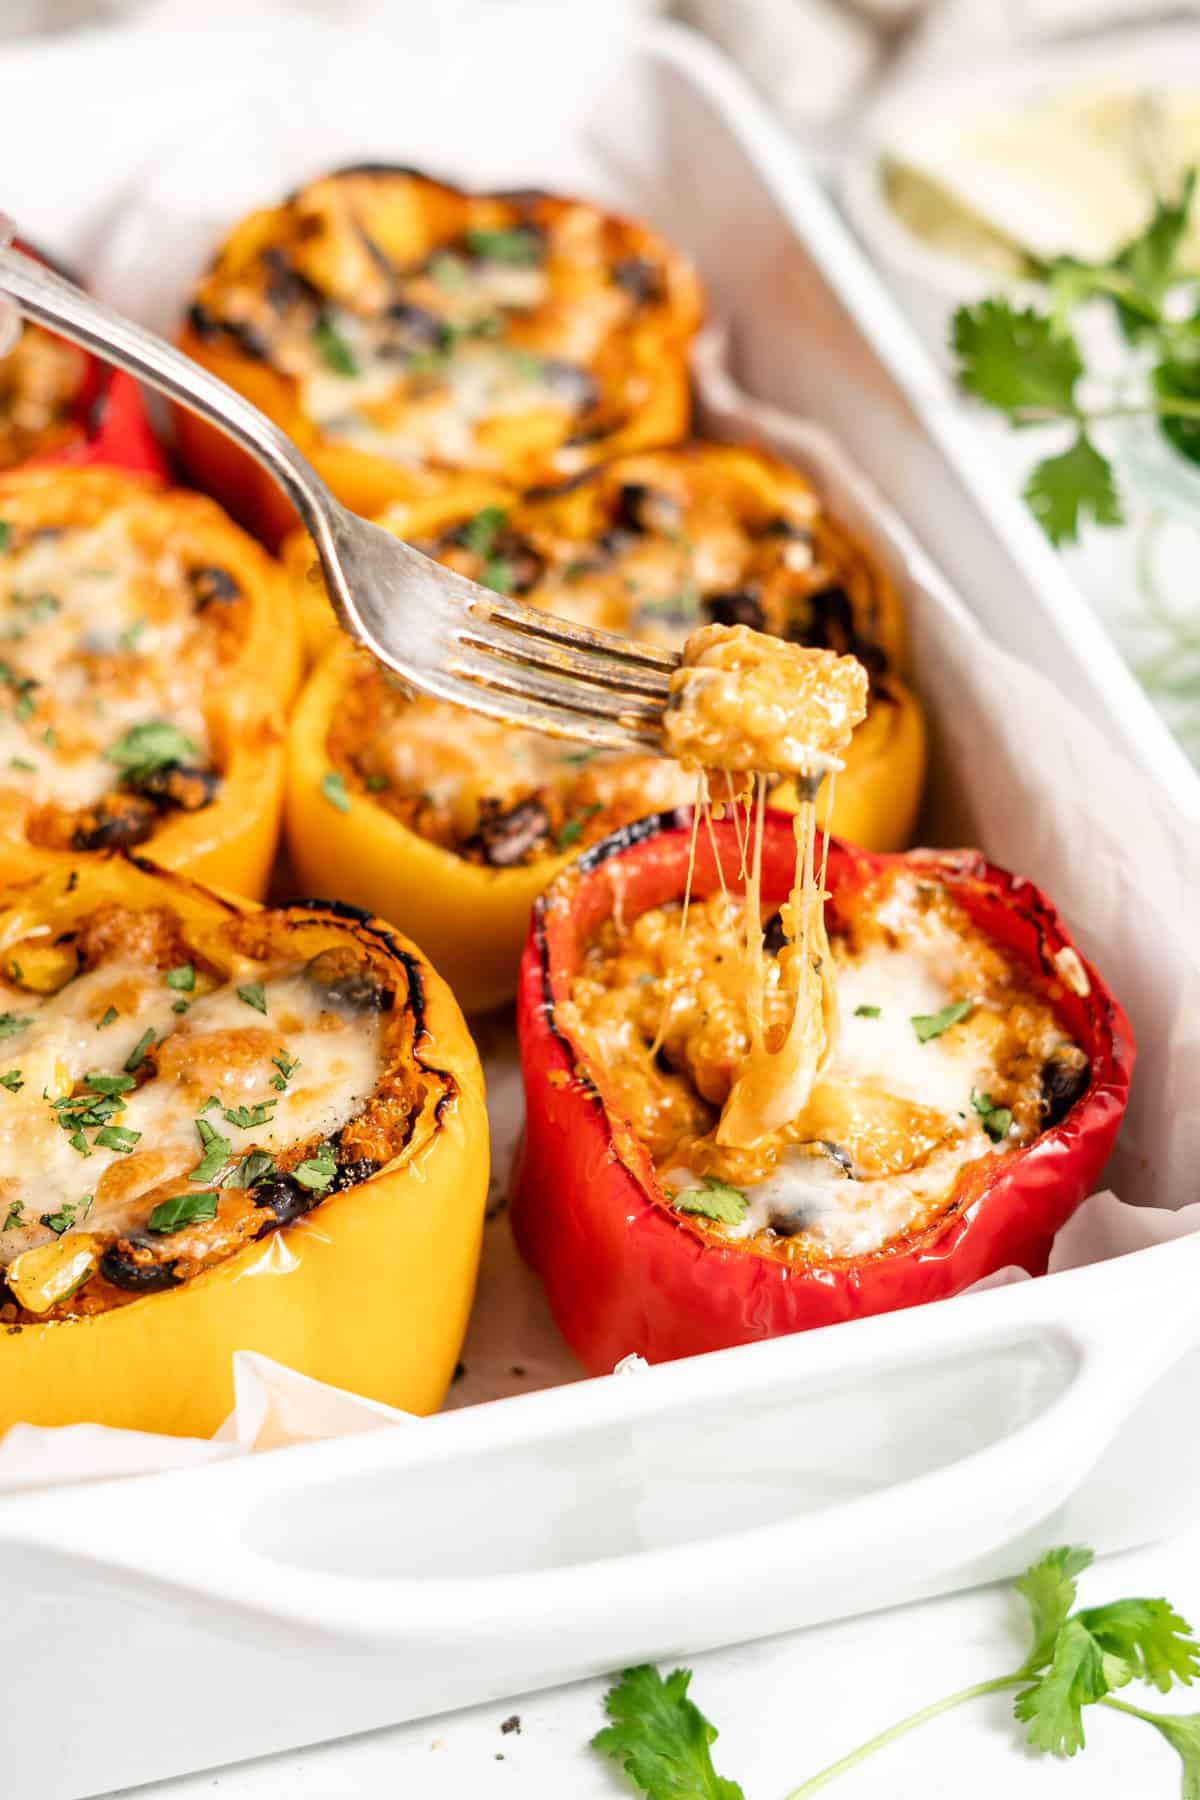 Vegan stuffed peppers in a baking dish with mozzarella cheese.